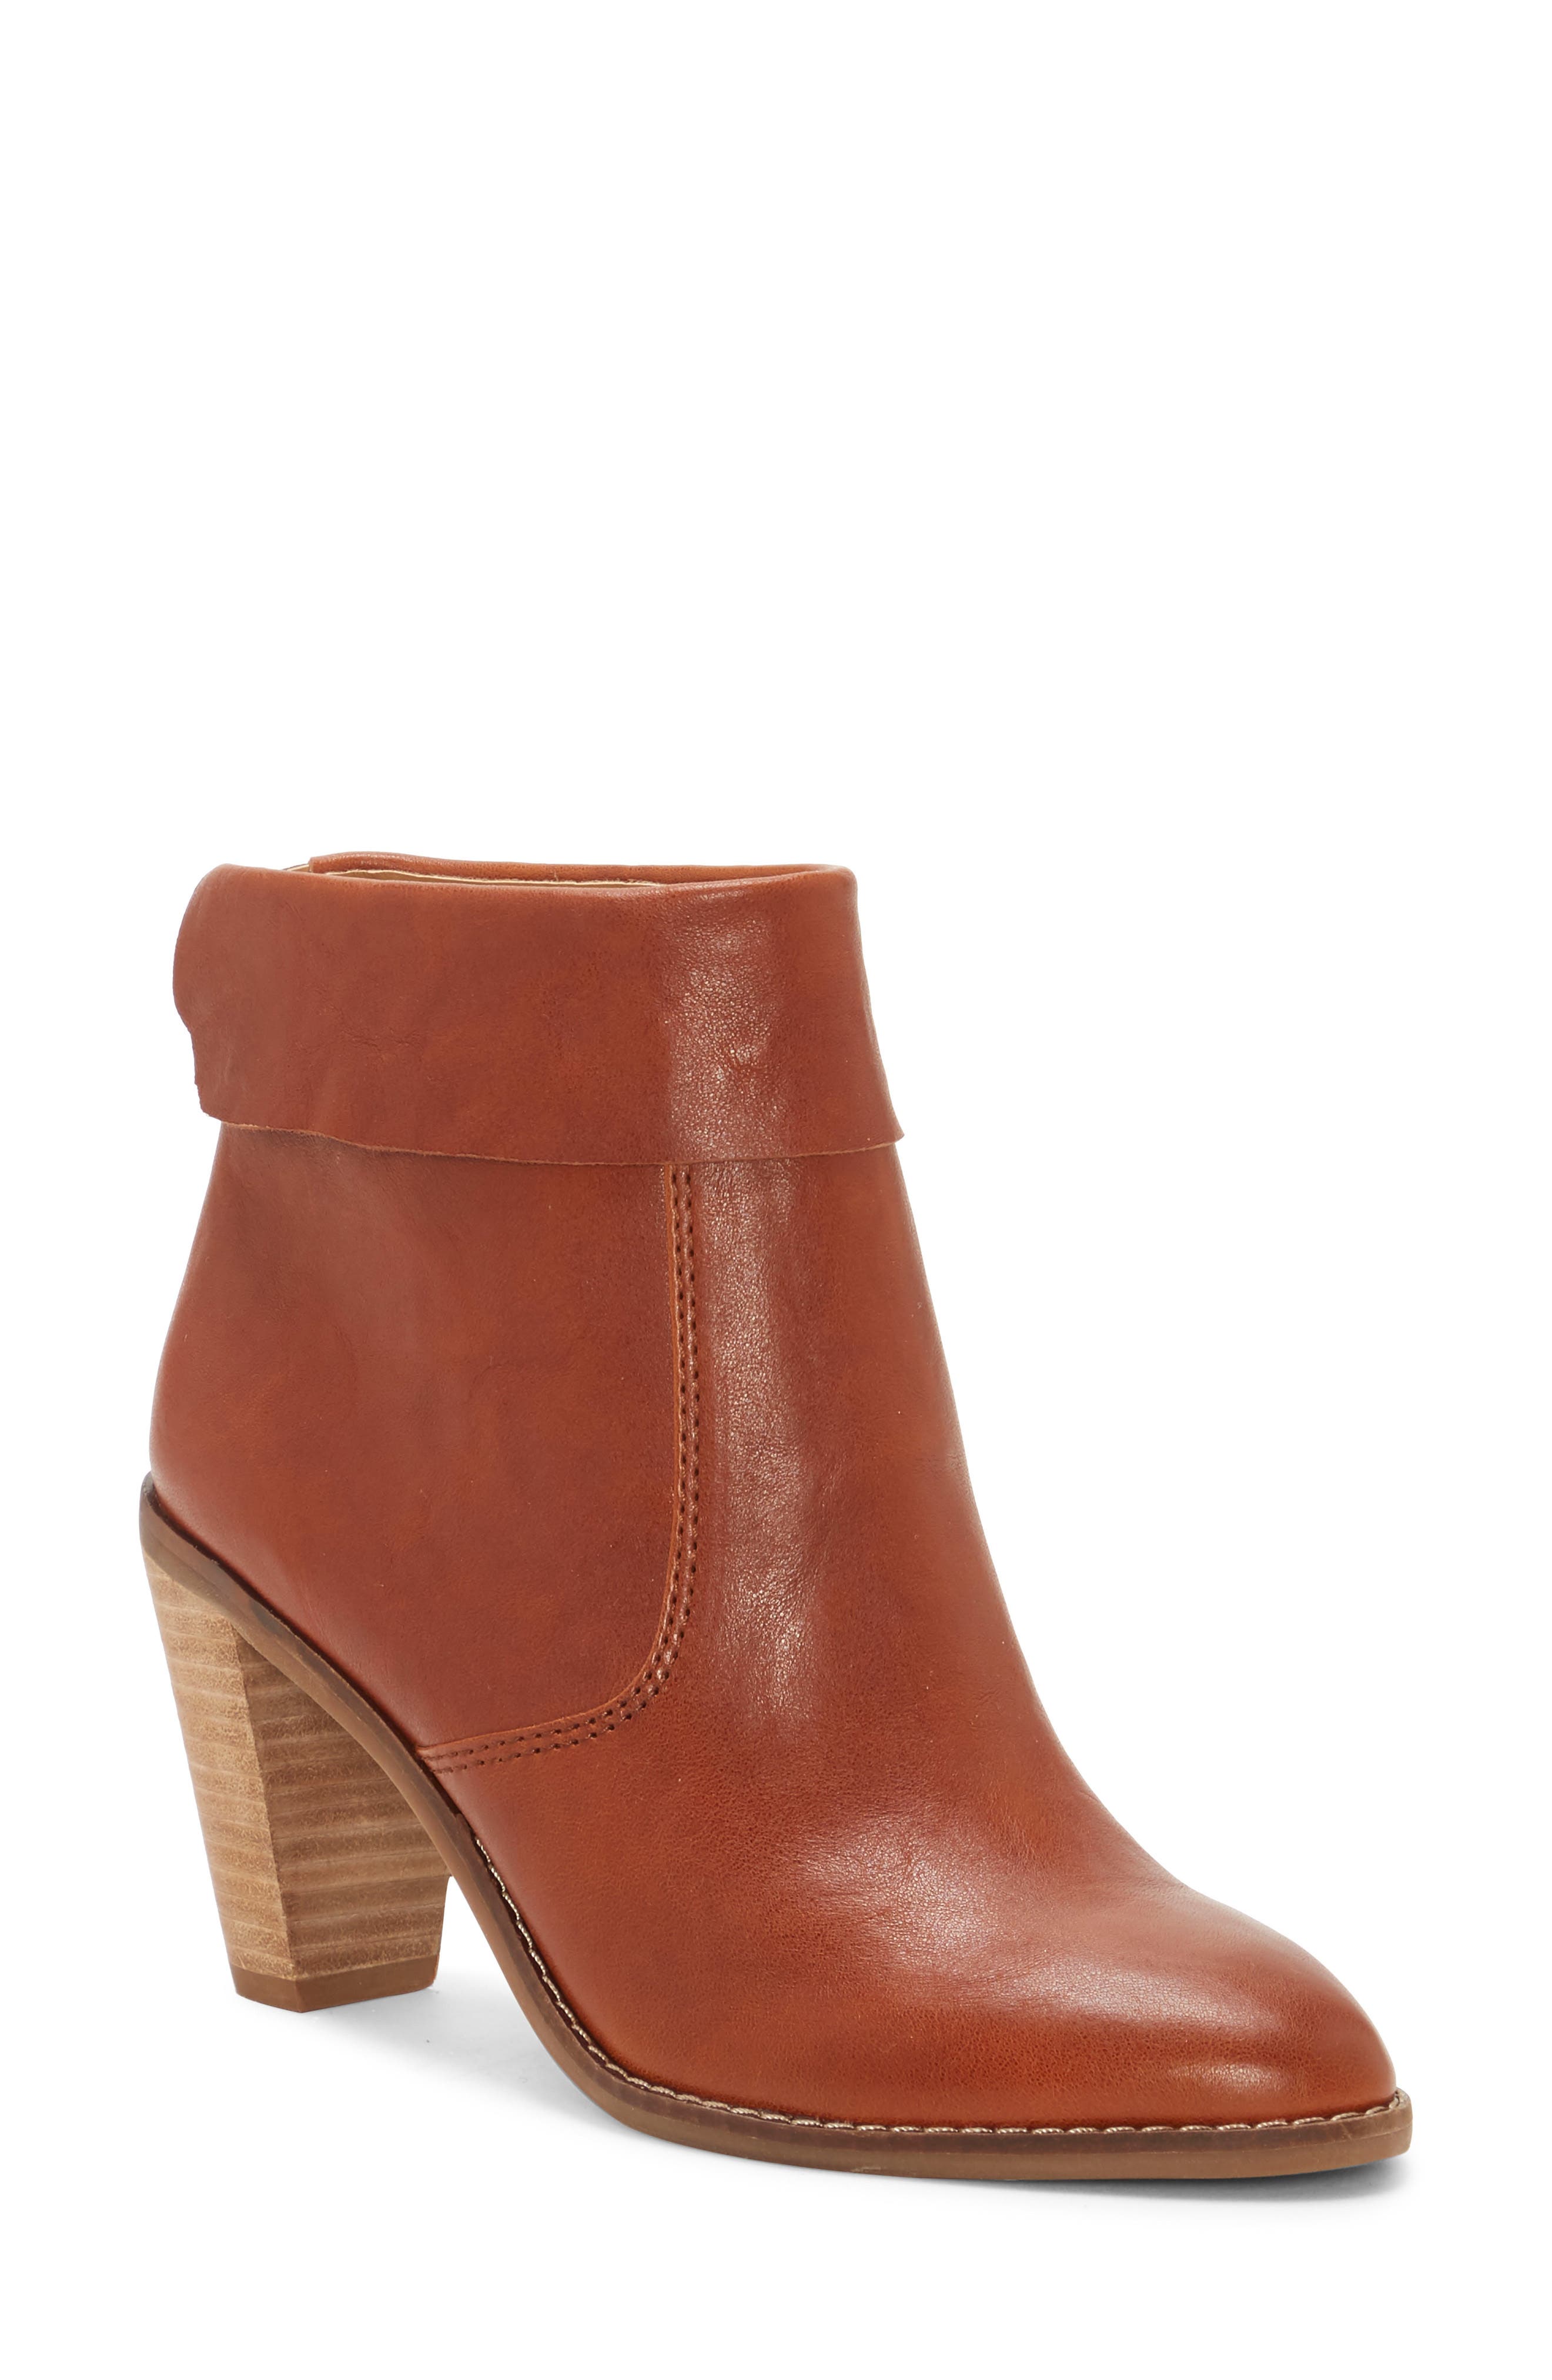 nordstrom lucky brand boots